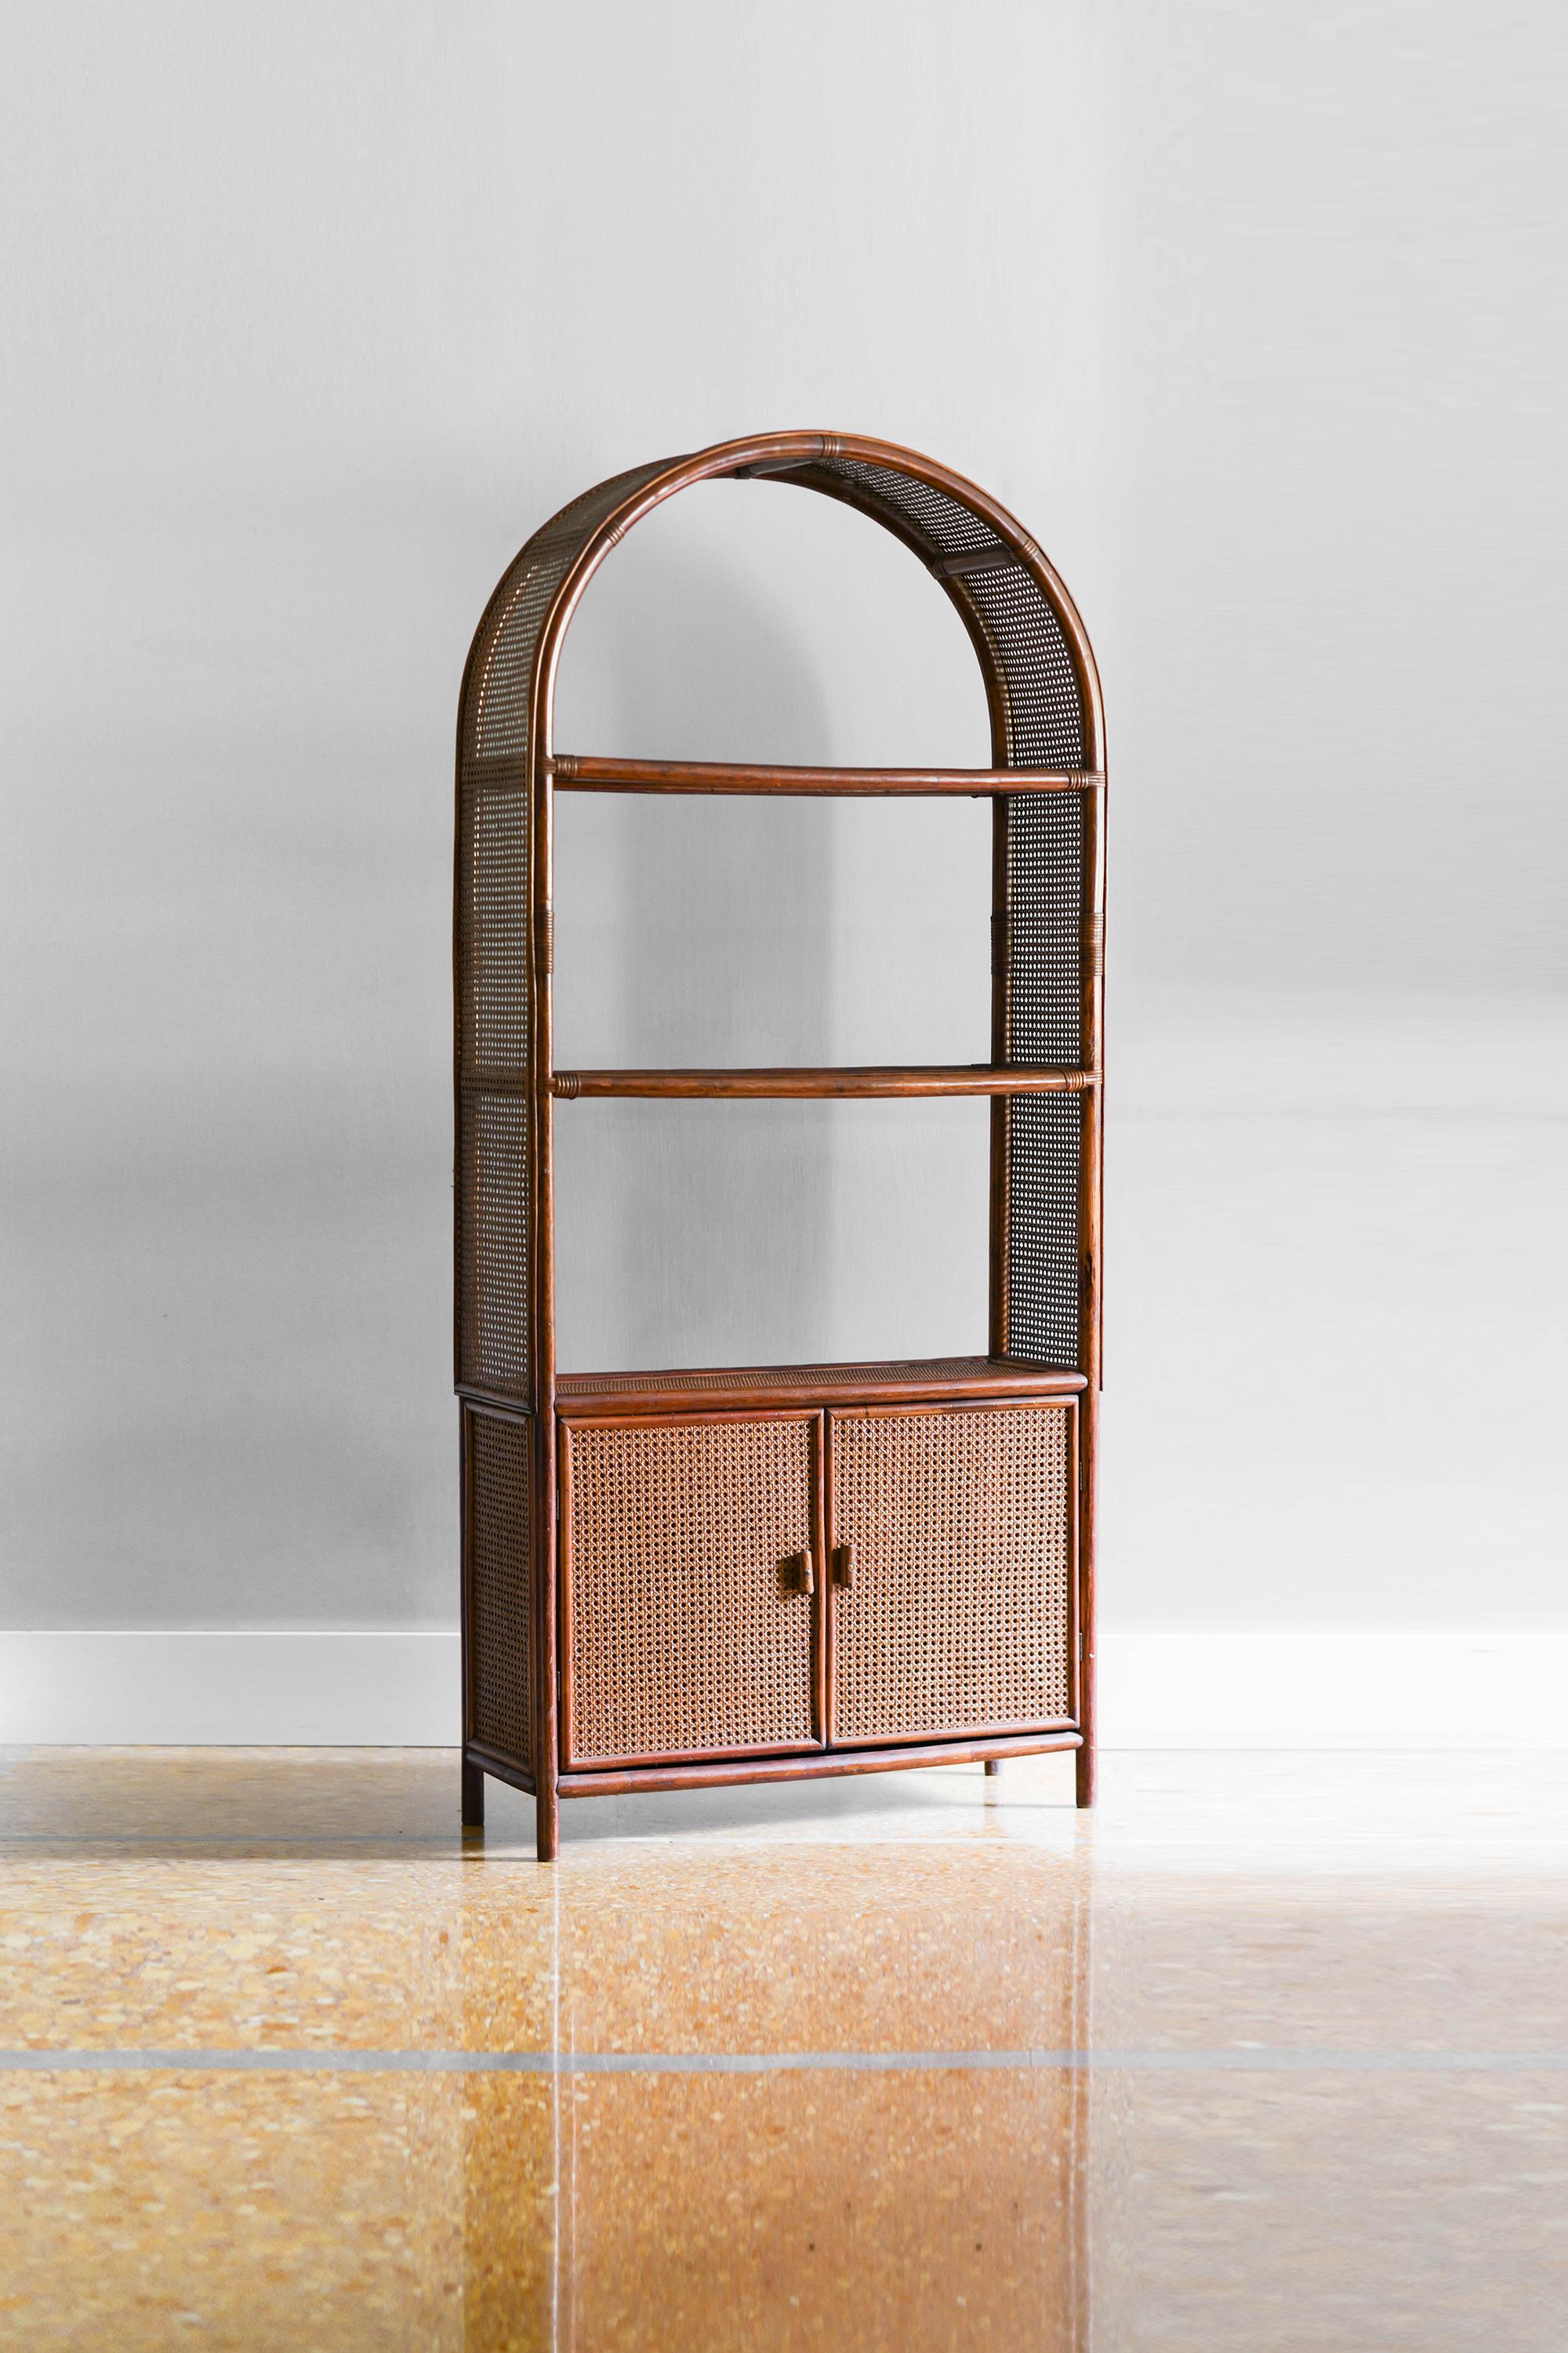 Bookcase in rush, wicker and Vienna straw. 
Product details
Storage unit with shelves and doors in dark finish.
Dimensions: 90 W x 200 H x 32 D
Production: Italy in the 80s.